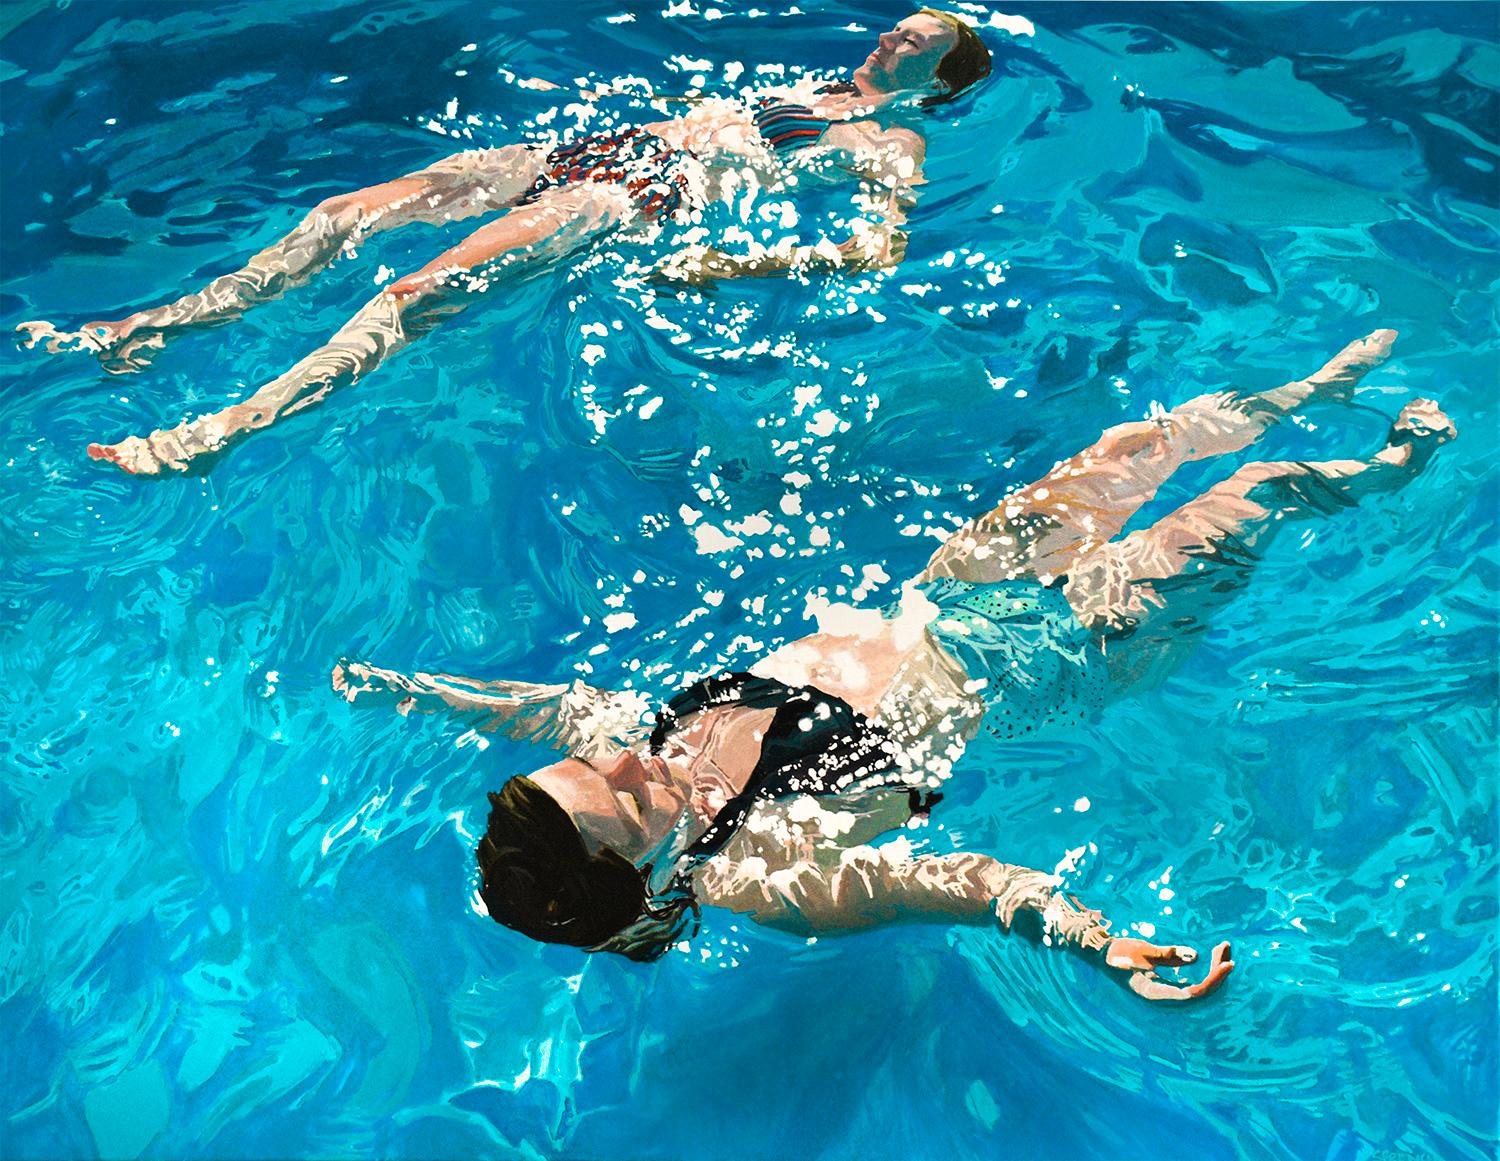 Weightless, Timeless: Oil Painting of Two Women Swimming in Pool